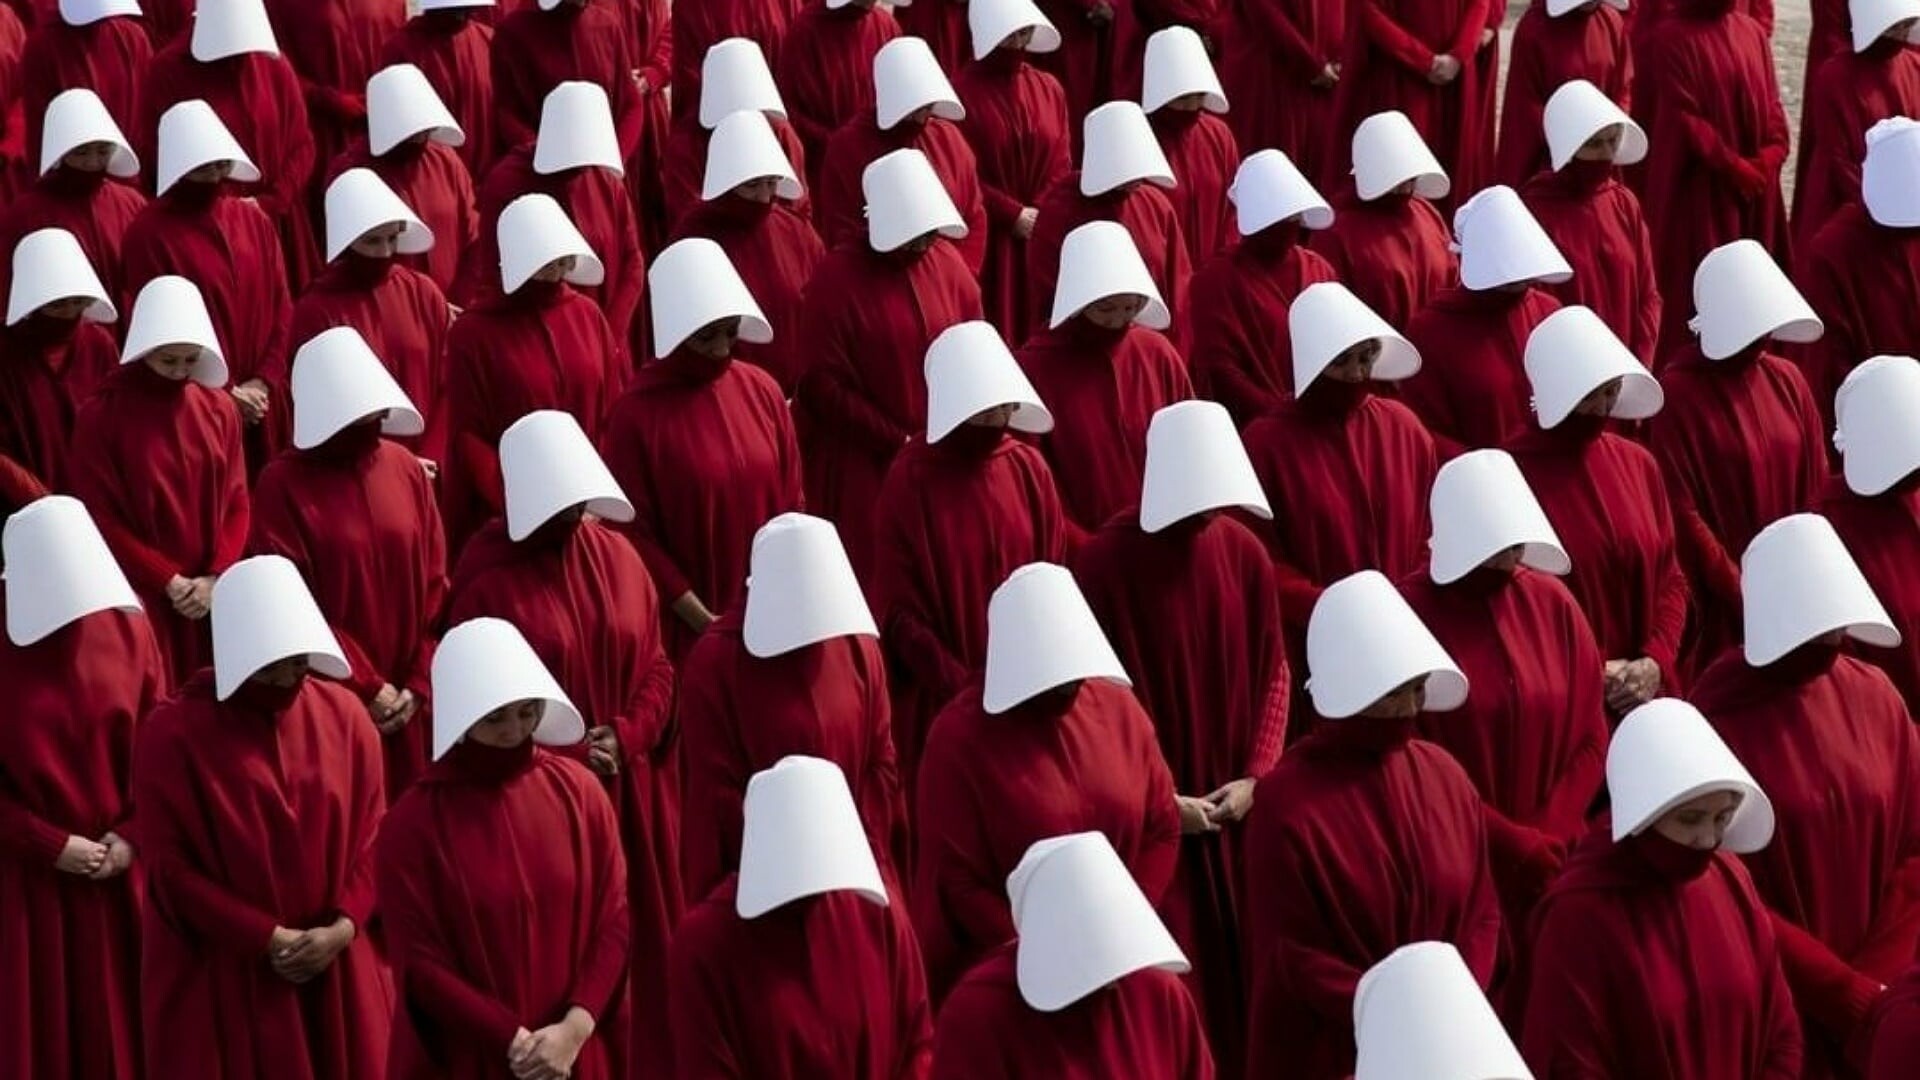 The Handmaid's Tale: A theonomic, totalitarian society, treats women as property of the state, Margaret Atwood. 1920x1080 Full HD Background.